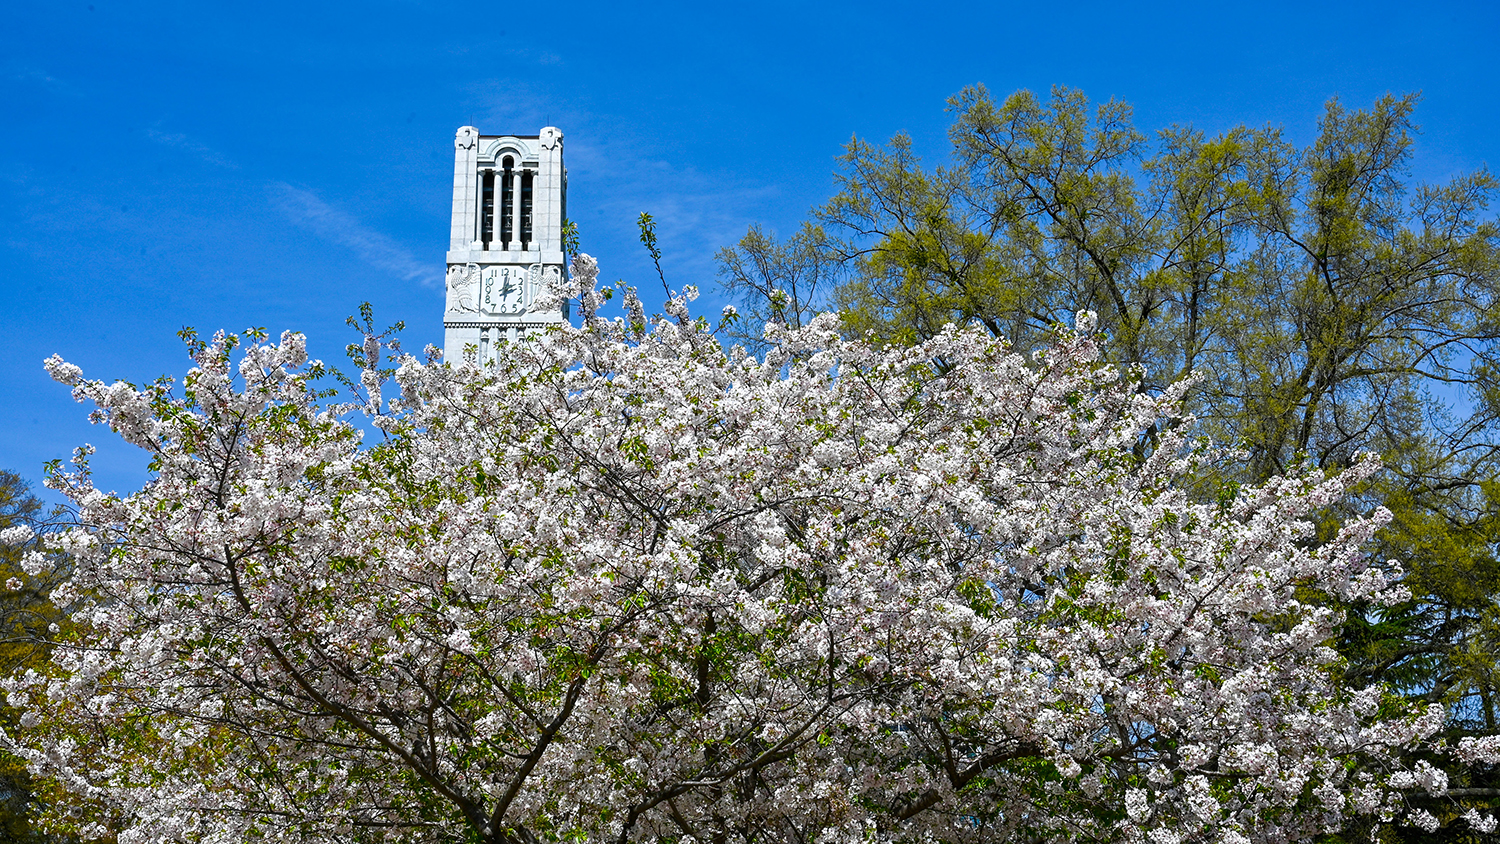 The North Carolina State University belltower, framed by flowering trees during spring beneath a deep blue sky.